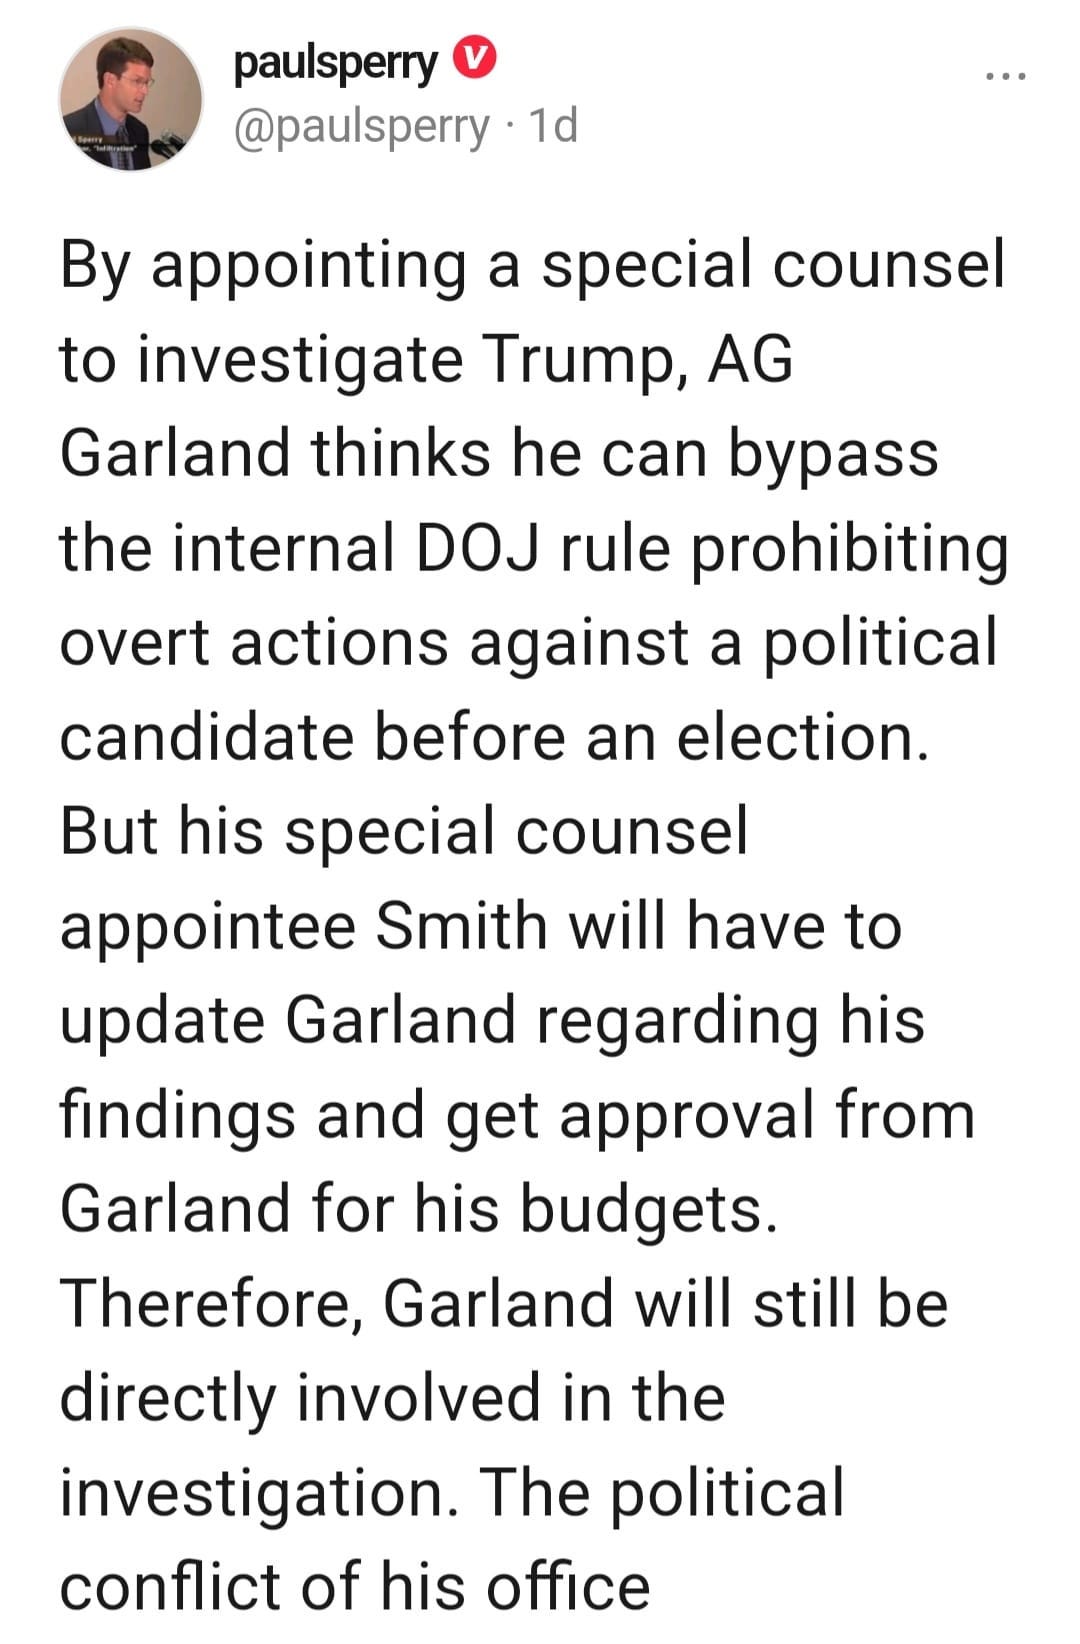 May be an image of 1 person and text that says 'paulsperry @pausperry ・1d By appointing a special counsel to investigate Trump, AG Garland thinks he can bypass the internal DOJ rule prohibiting overt actions against a political candidate before an election. But his special counsel appointee Smith will have to update Garland regarding his findings and get approval from Garland for his budgets. Therefore, Garland will still be directly involved in the investigation. The political conflict of his office'